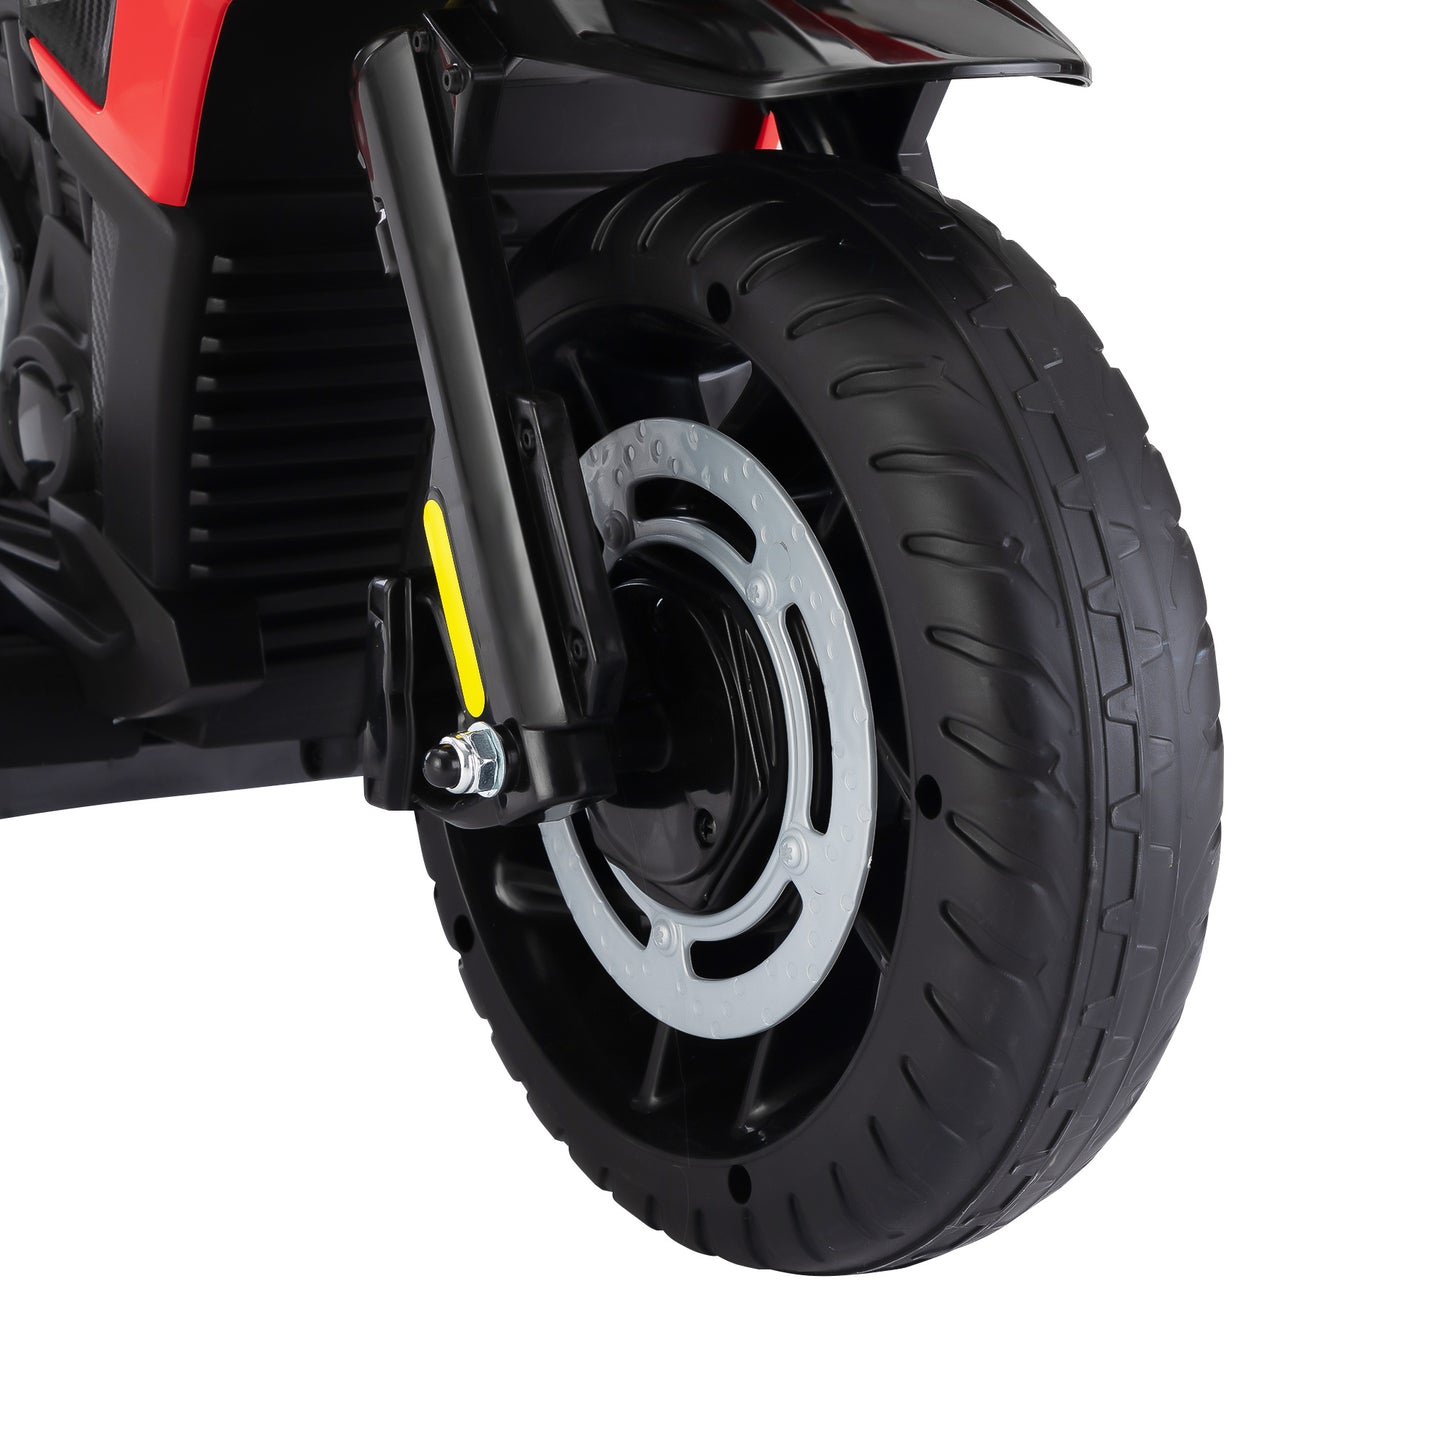 12V Off-Road Motorcycle - Red